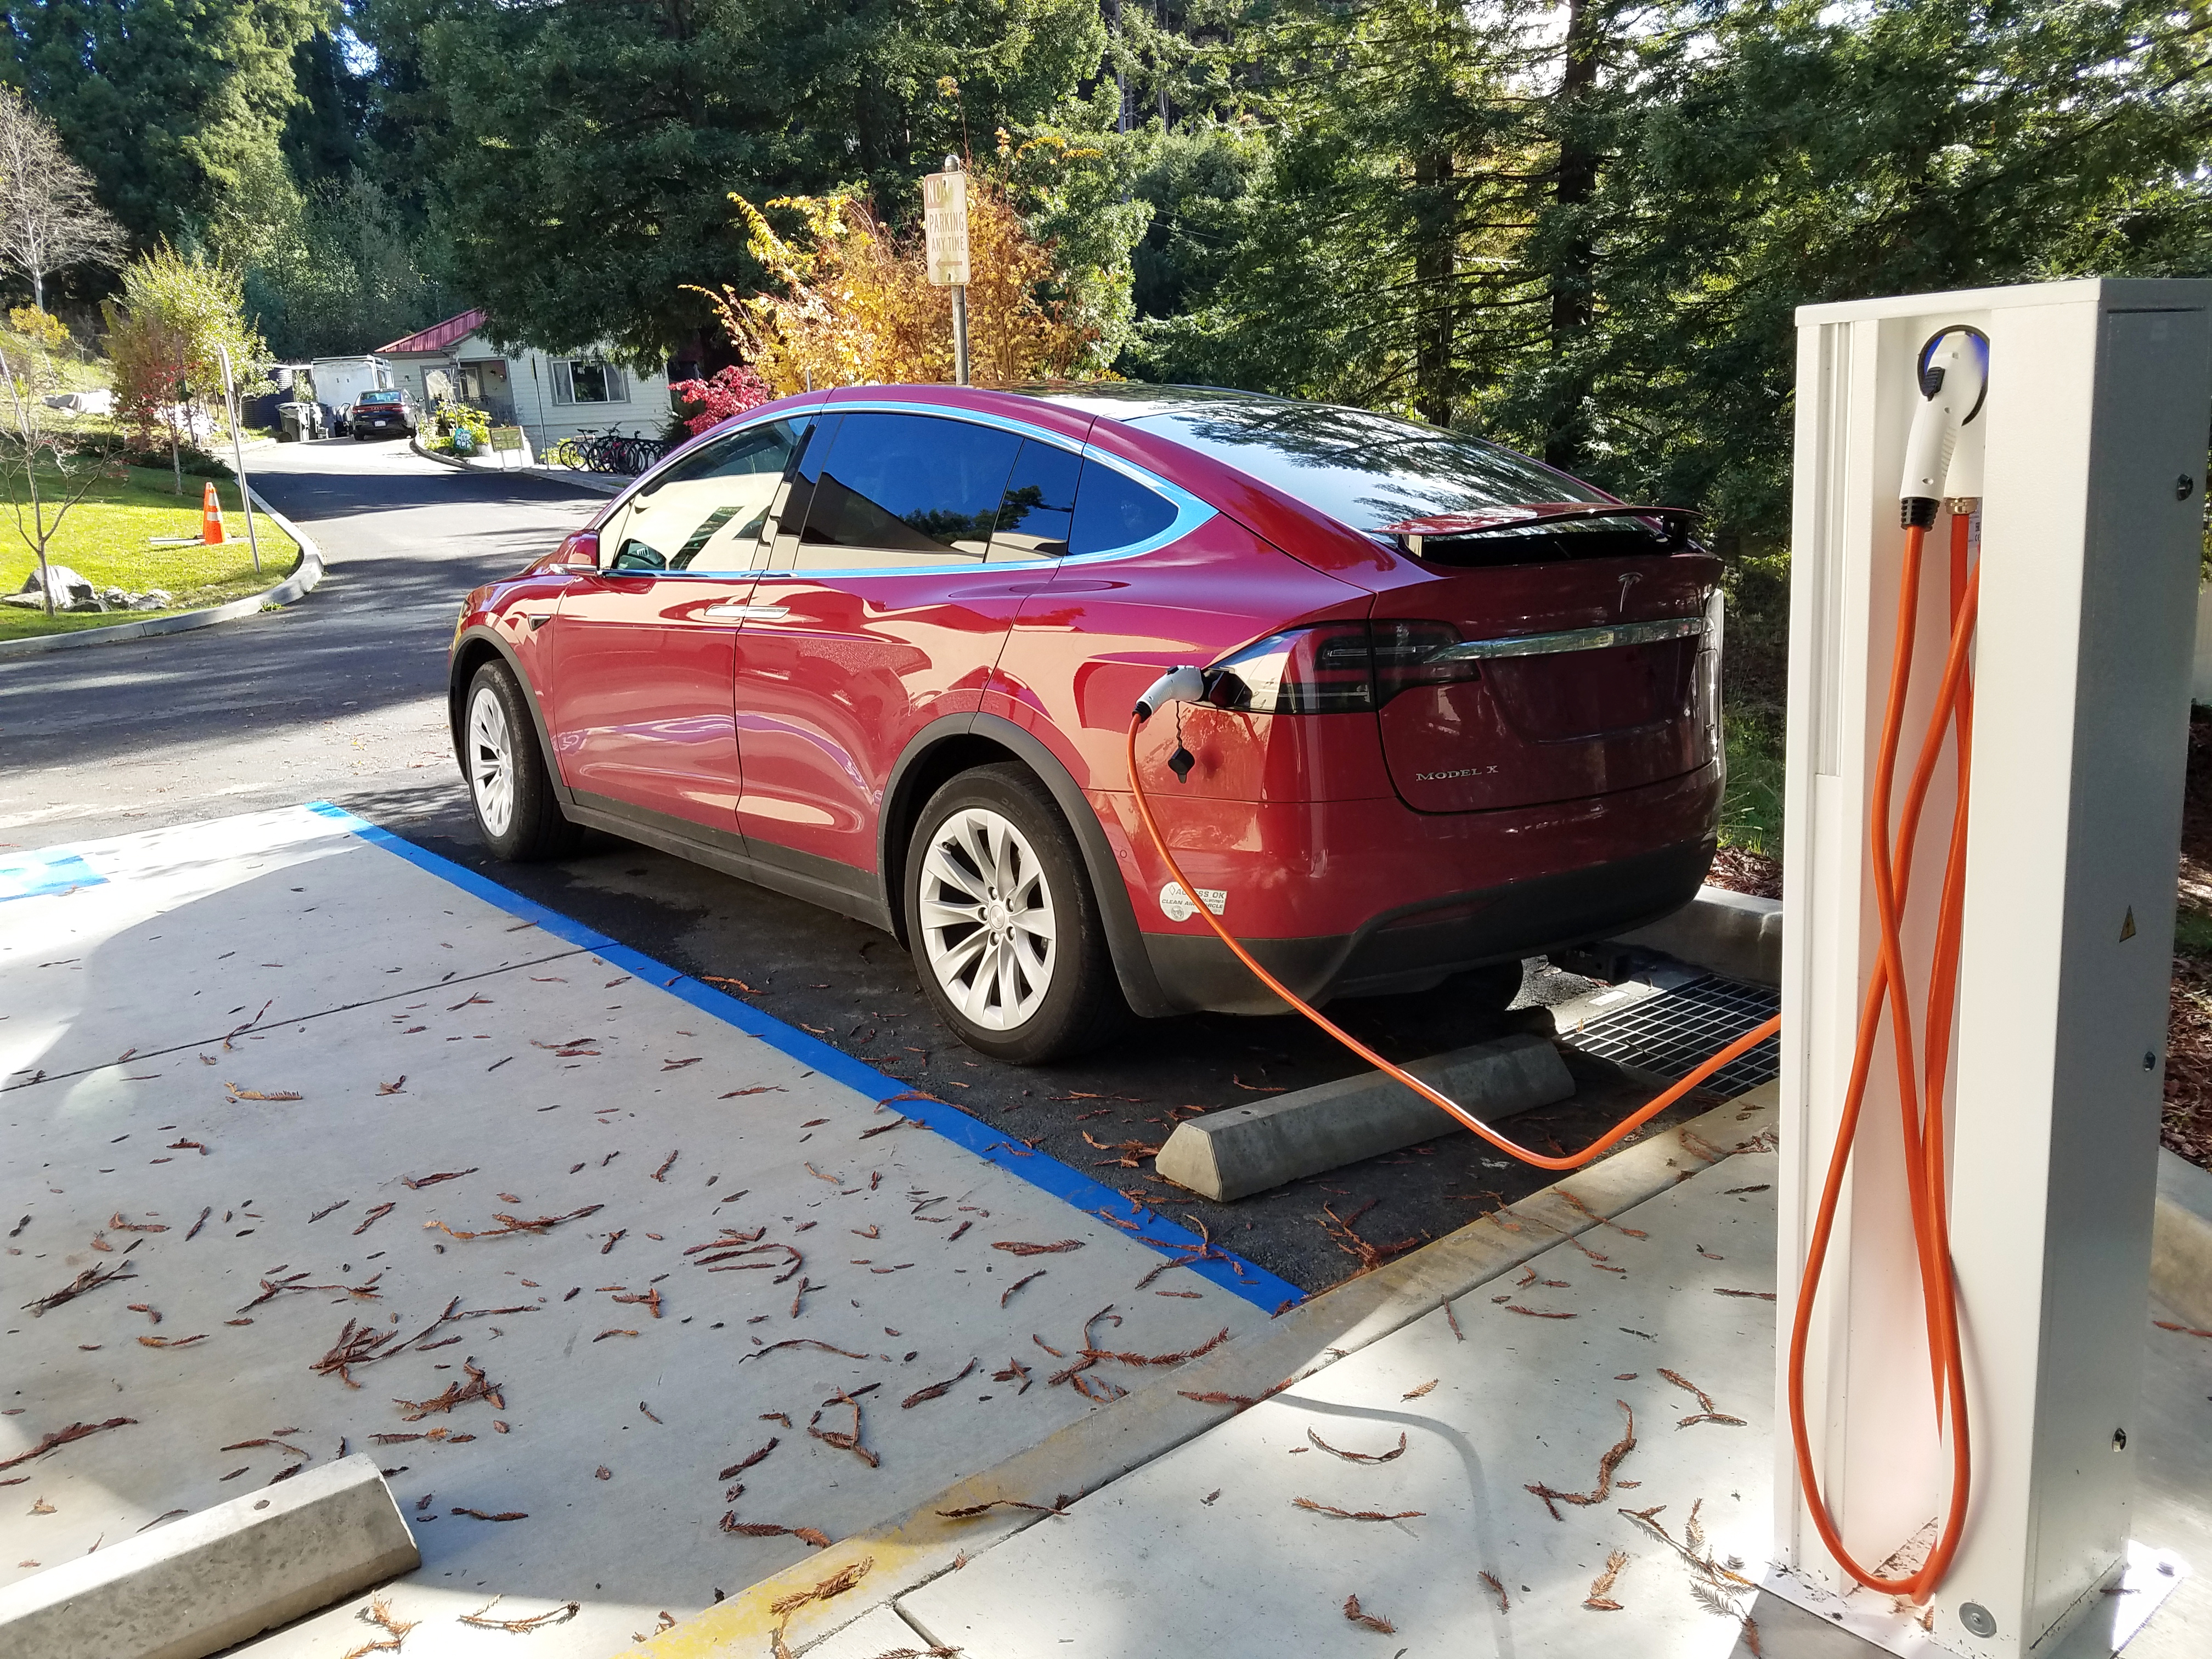 A red Tesla is charging at the Schatz EV station.